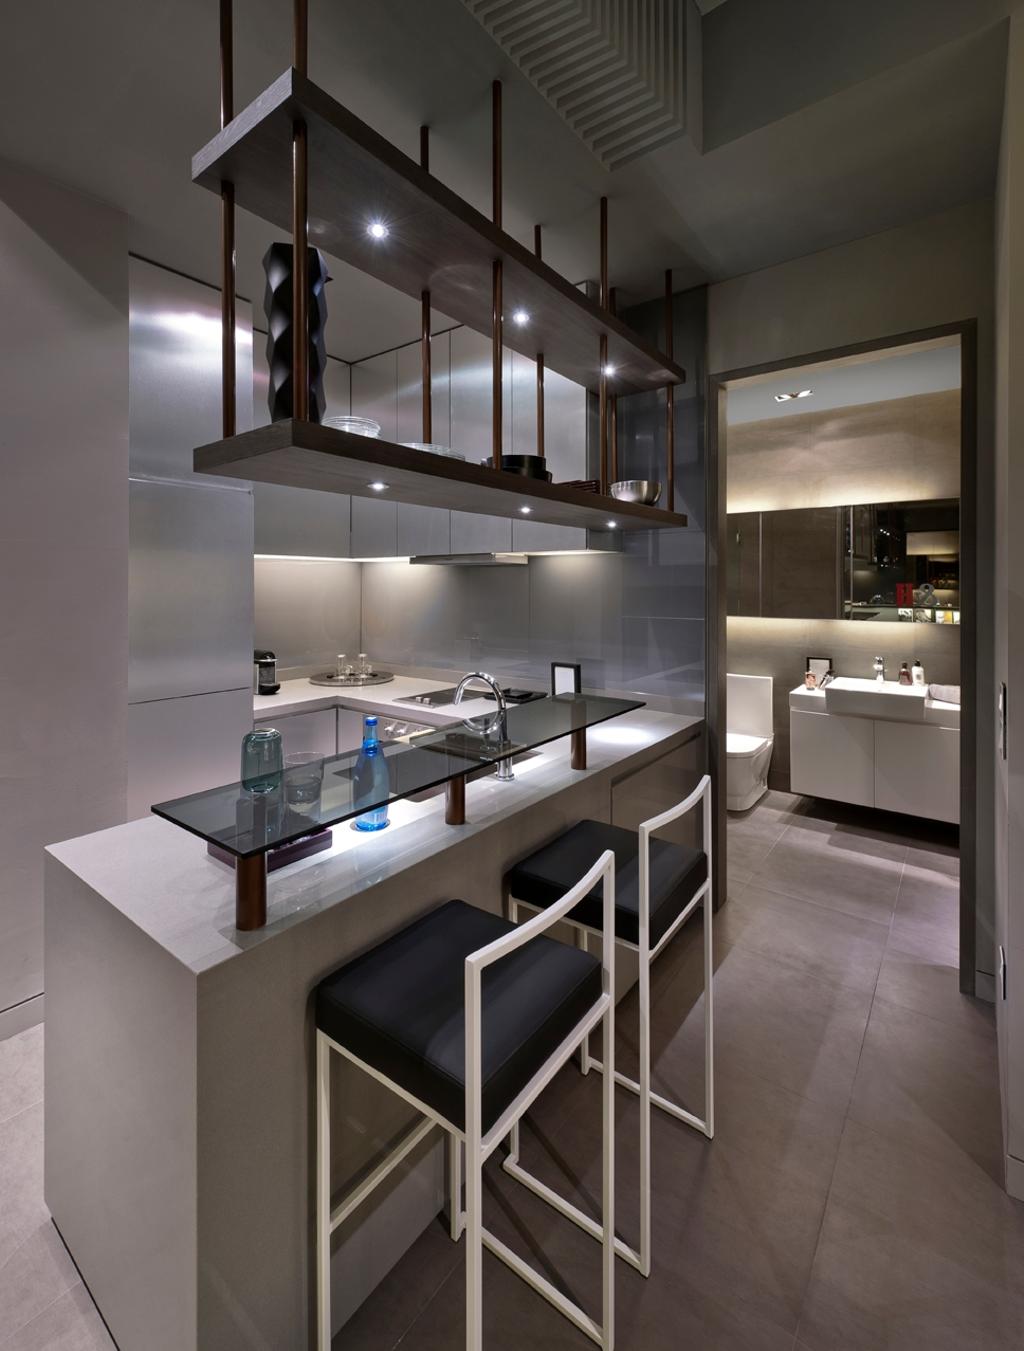 UOL Edge, Commercial, Architect, Ministry of Design, Modern, High Chair, Kitchen Countertop, Hanging Shelf, Shelf Lighting, Bathroom, Indoors, Interior Design, Room, Dining Table, Furniture, Table, Light Fixture